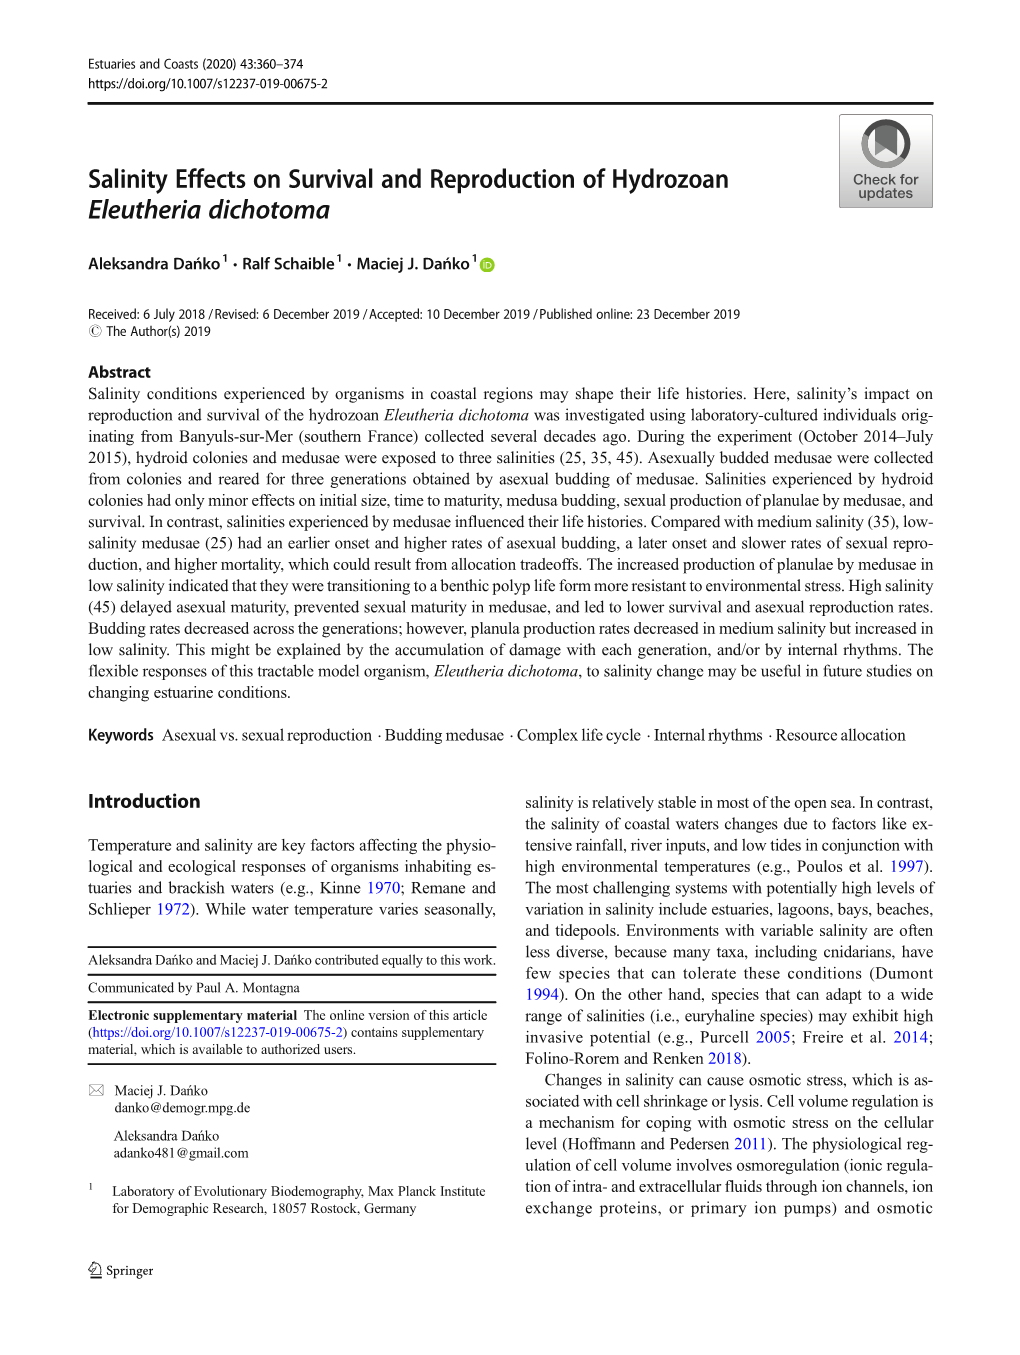 Salinity Effects on Survival and Reproduction of Hydrozoan Eleutheria Dichotoma